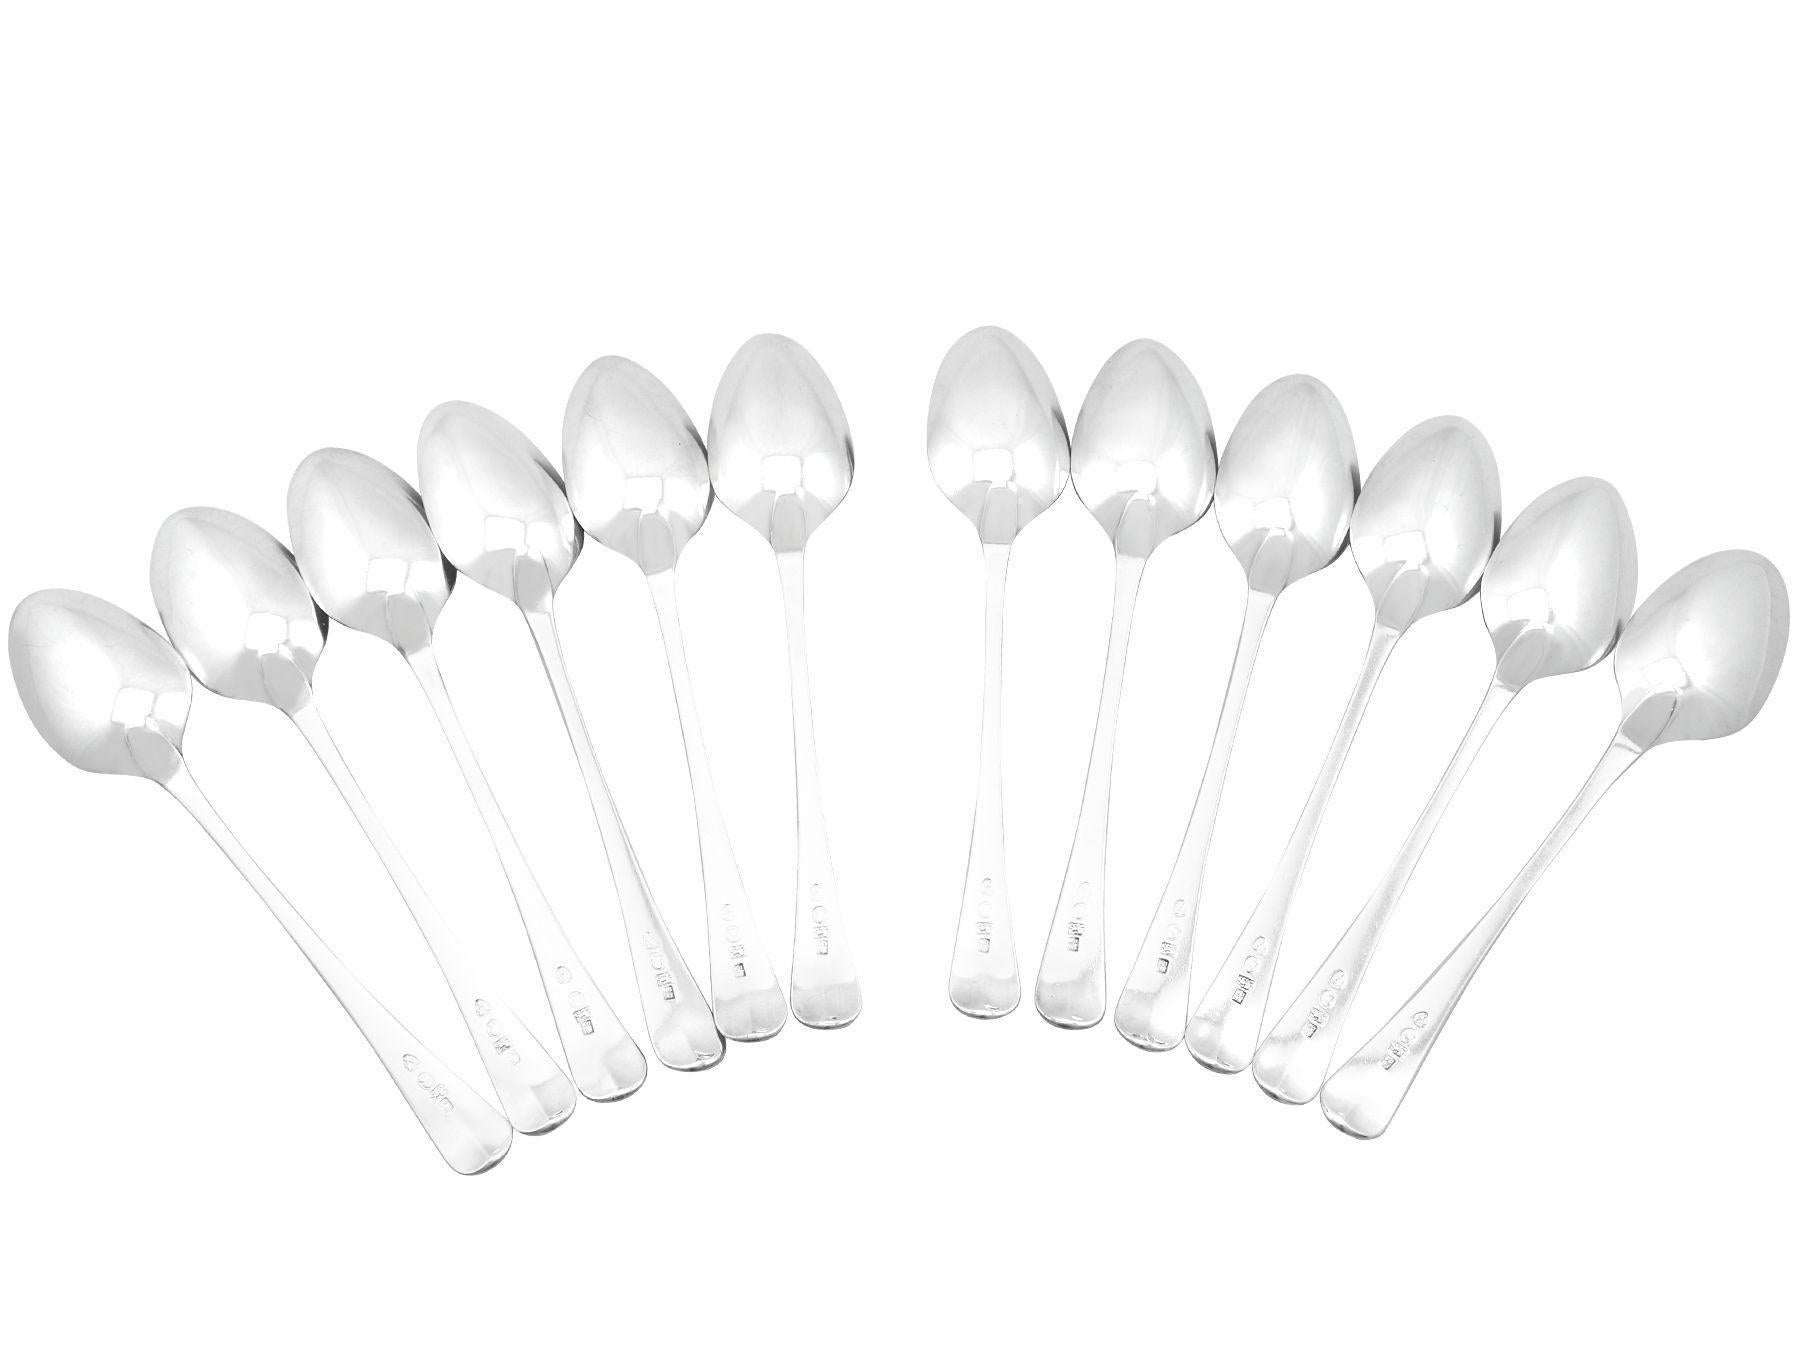 An exceptional, fine and impressive set of twelve antique Georgian Newcastle sterling silver Old English pattern table/serving spoons; an addition to our silver flatware collection

These exceptional antique Georgian Newcastle sterling silver